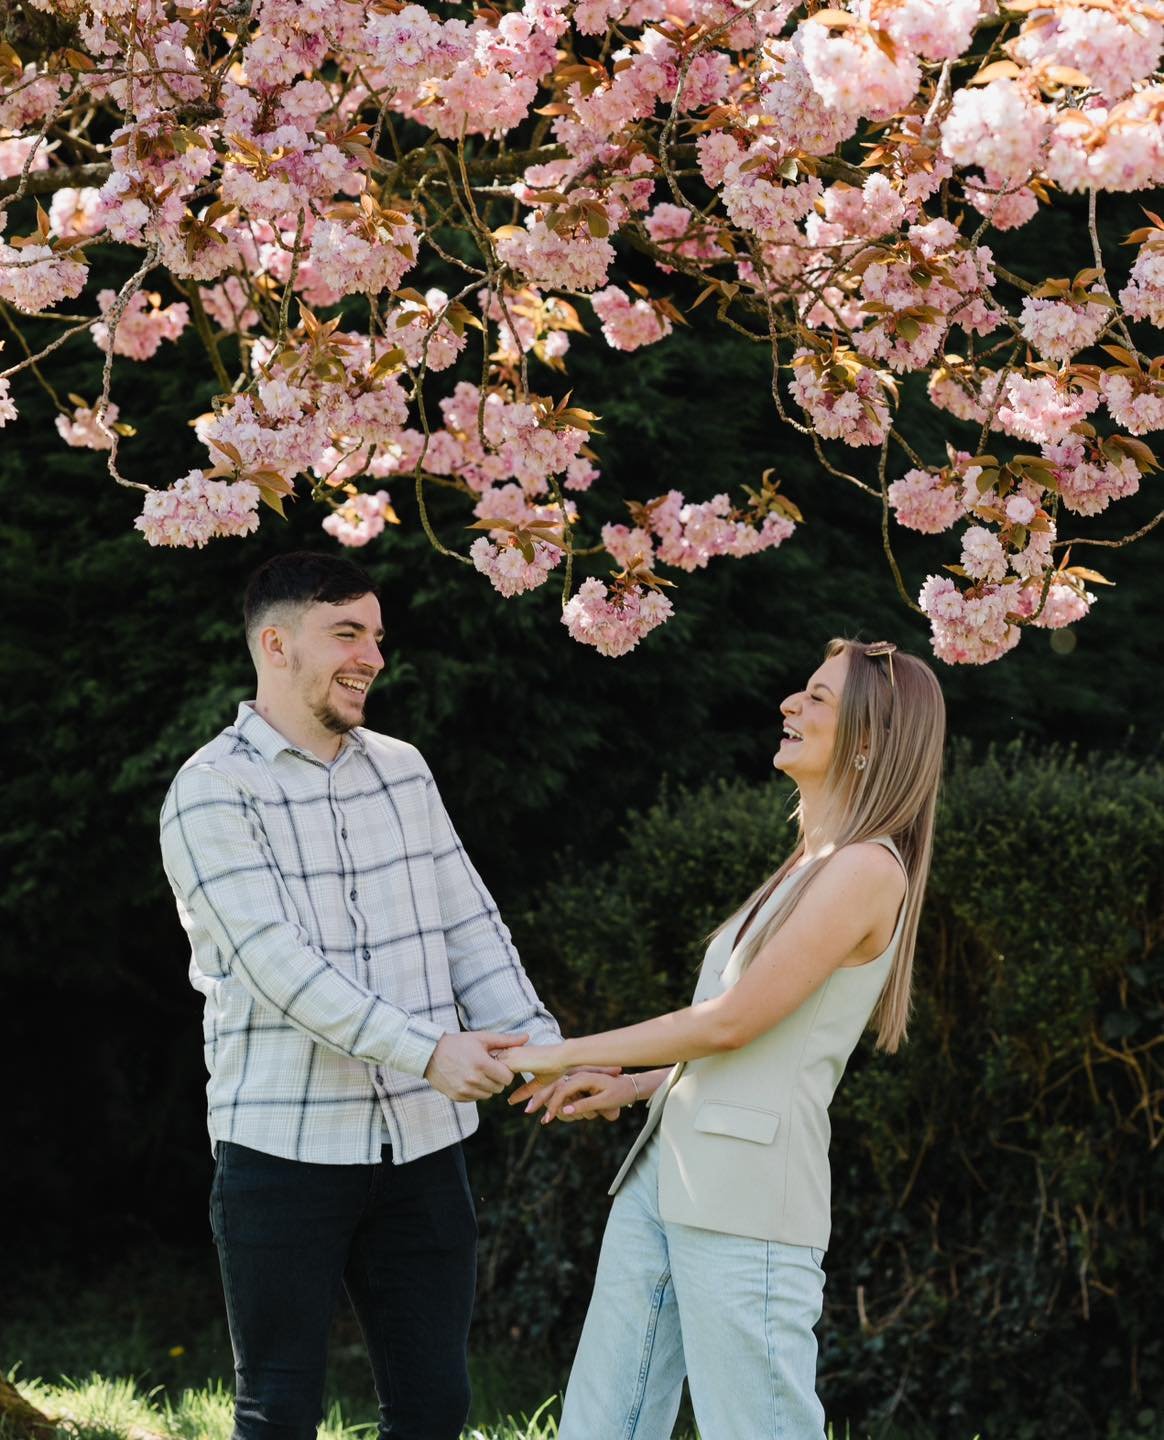 Can&rsquo;t wait to this very special day coming up in May with Lee &amp; Seainin. 
A very special couple to me and so many others. 
.
#cantwait #engagementshoot #preweddingshoot #prewedding #weddingseason #adventureshoots #summervibes #cherryblossom